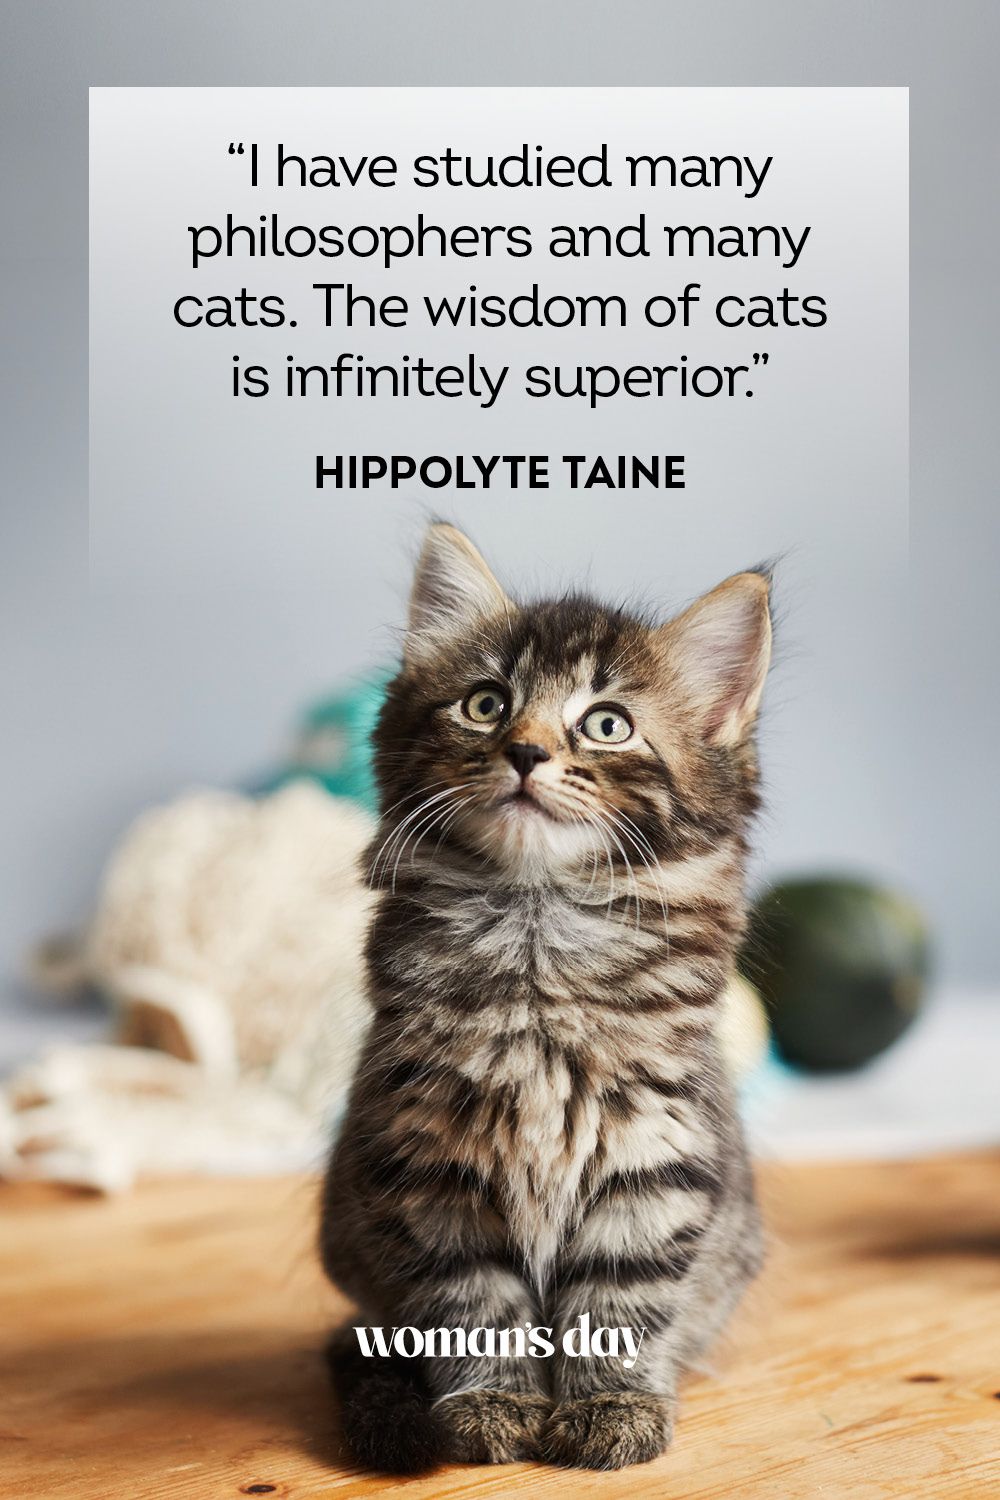 45 Best Cat Quotes - Cute Cat Sayings to Describe Your Kitten